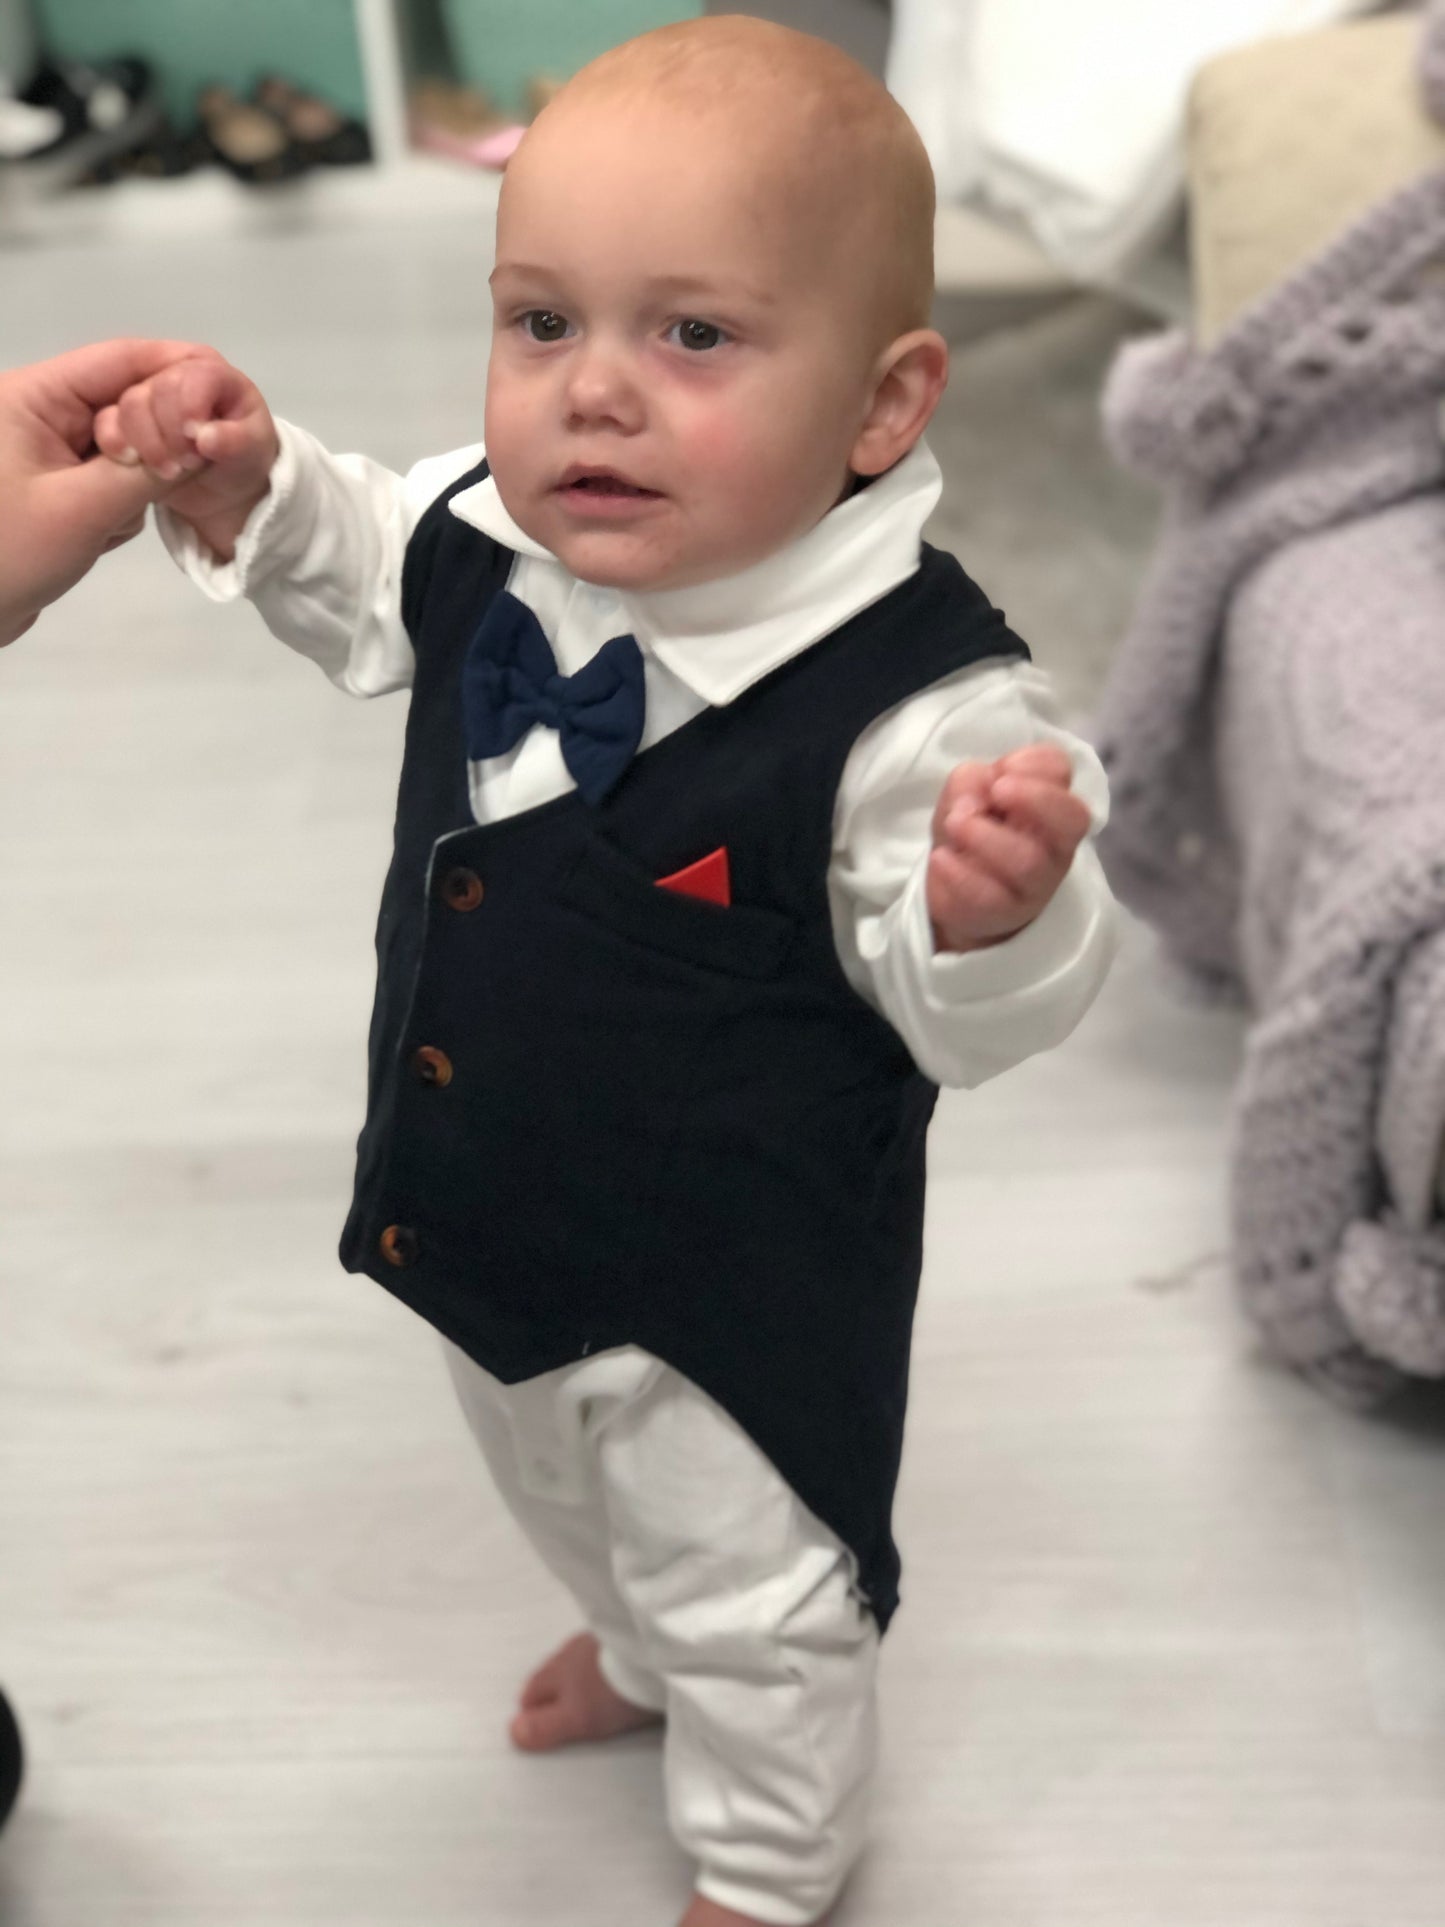 Baby Boys Special Occasion Romper and Waistcoat